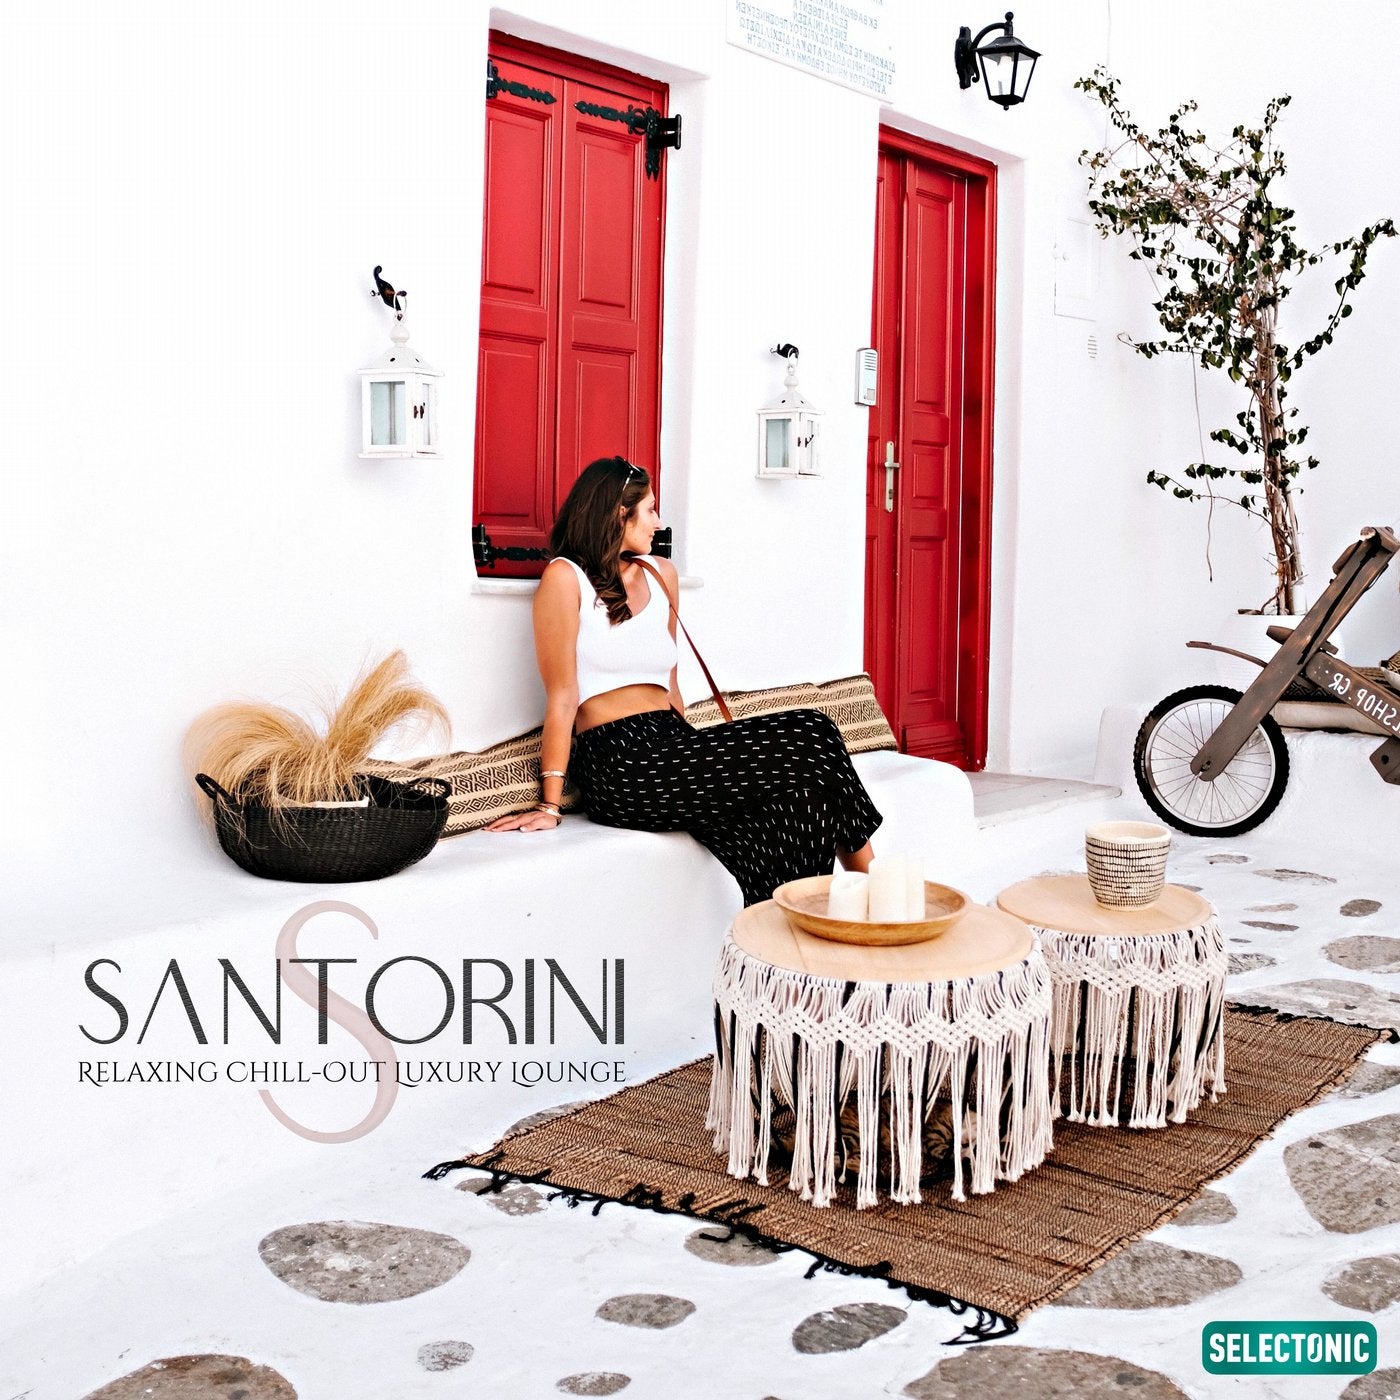 Santorini: Relaxing Chill-out Luxury Lounge